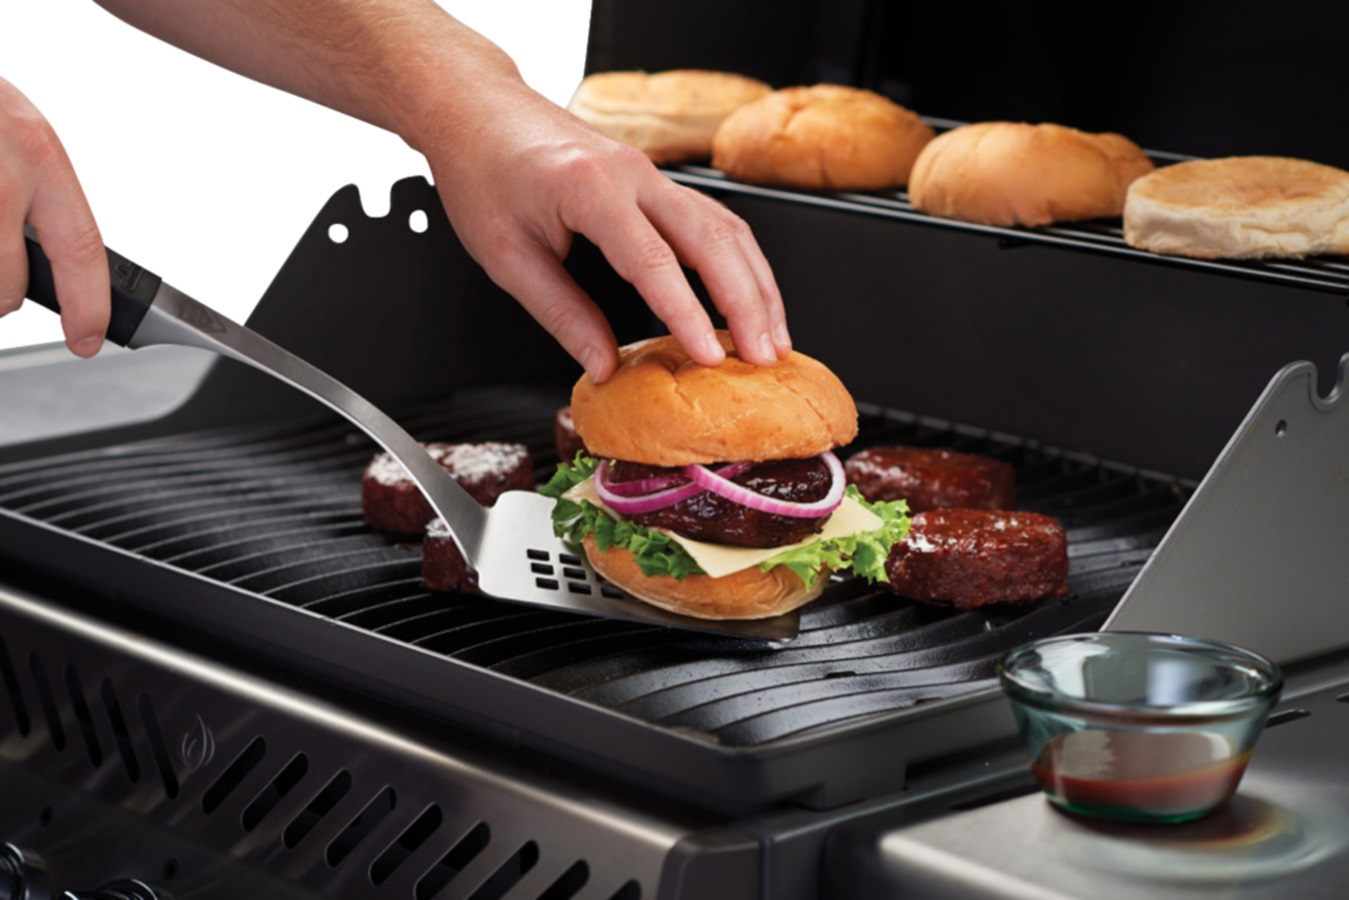 image of a person cooking burgers on a BBQ while burger buns are warmed on the warming rack